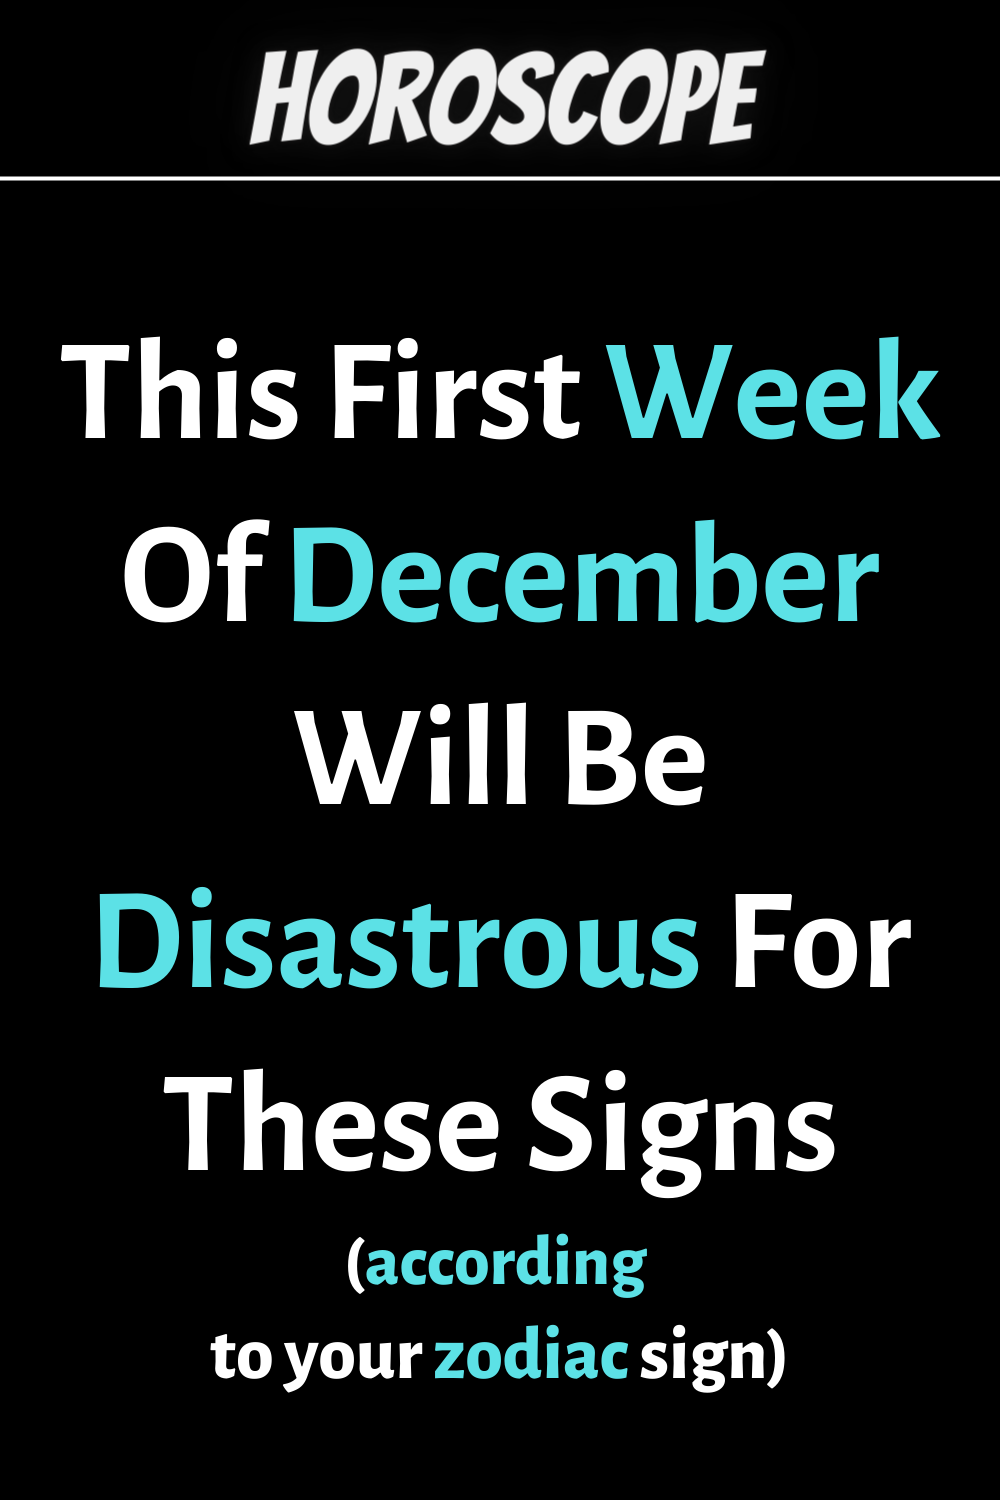 This First Week Of December Will Be Disastrous For These Signs